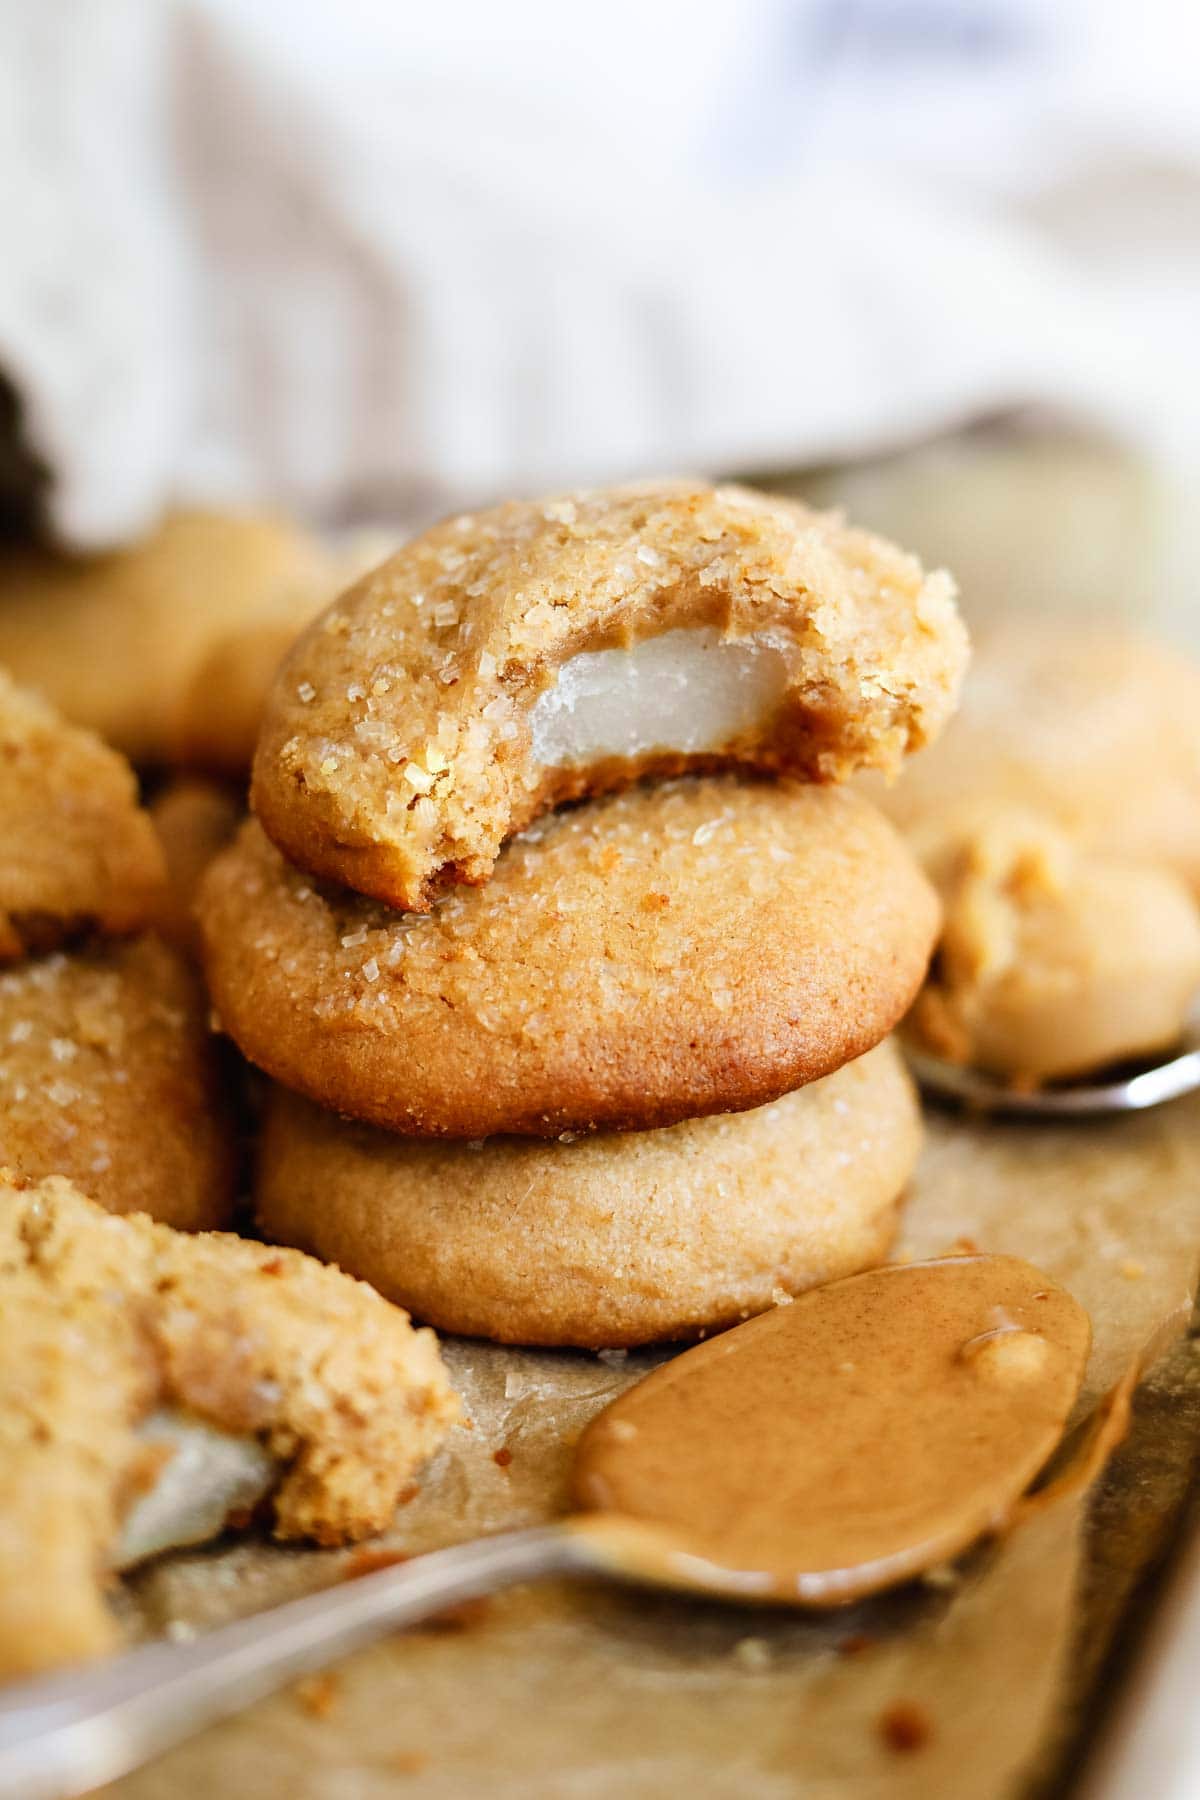 Mochi-stuffed peanut butter and miso cookies stacked with a bite taken out.